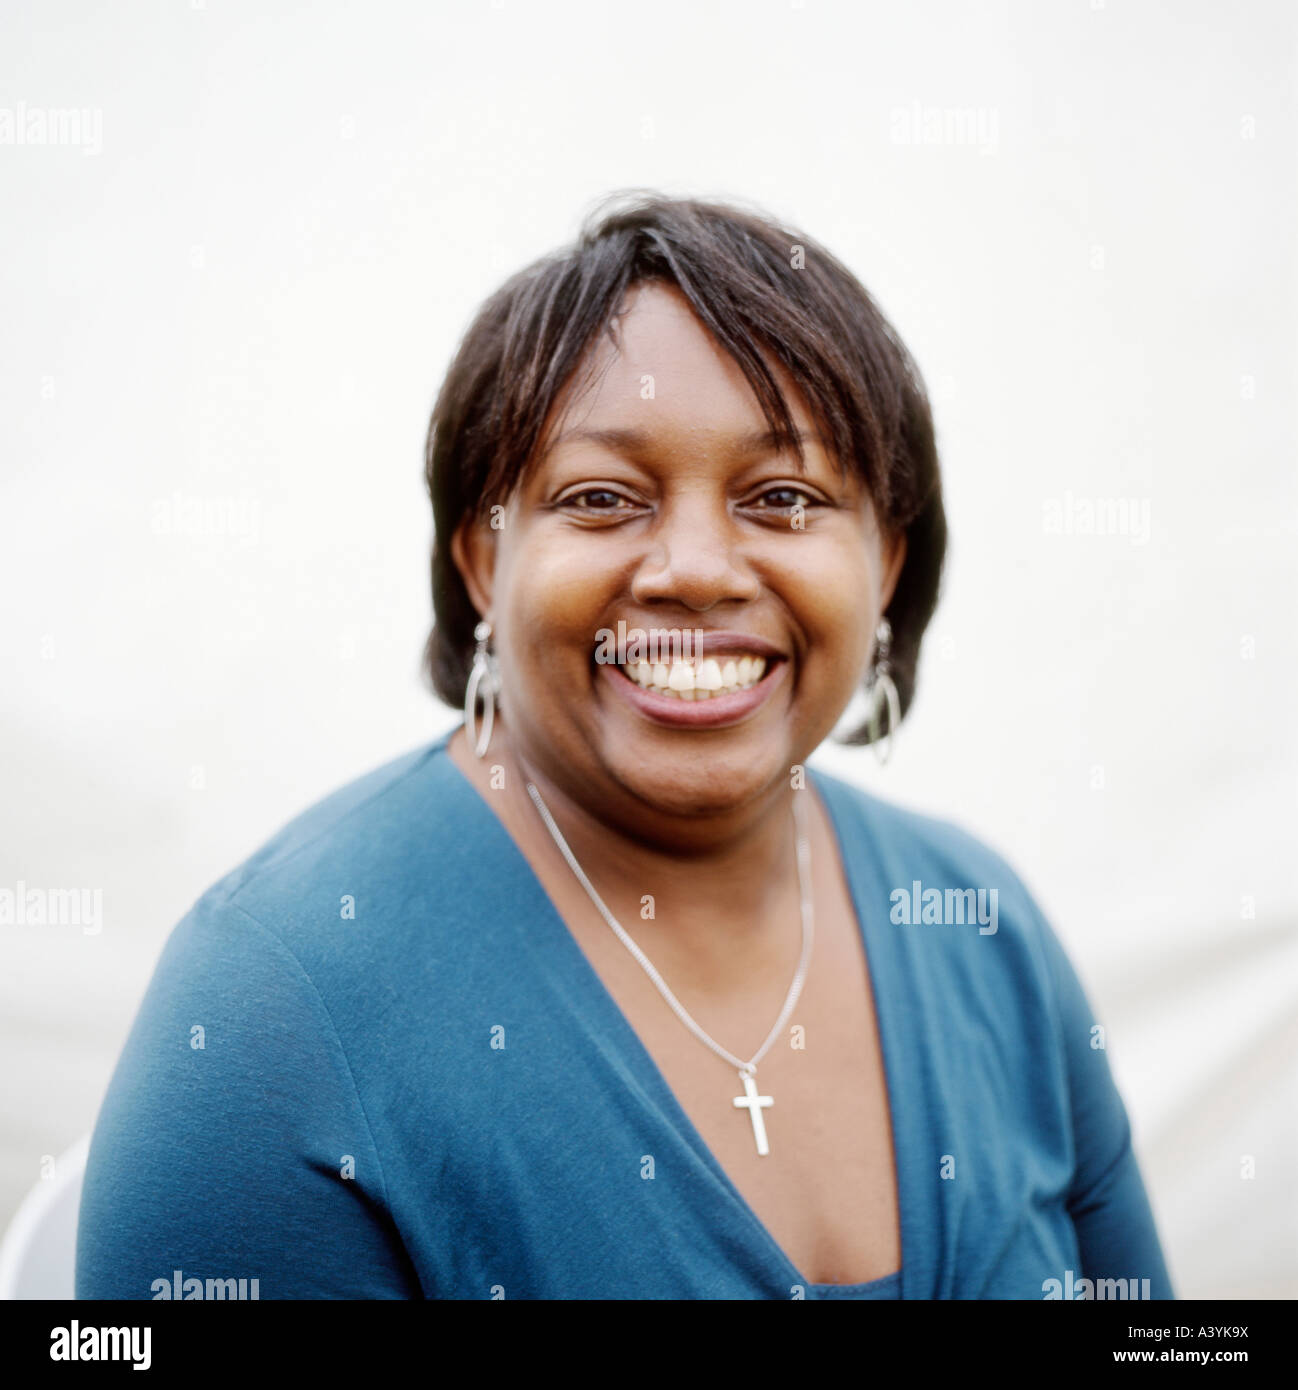 British woman female author Malorie Blackman at the Hay Festival Hay-on-Wye Wales UK Great Britain     KATHY DEWITT Stock Photo